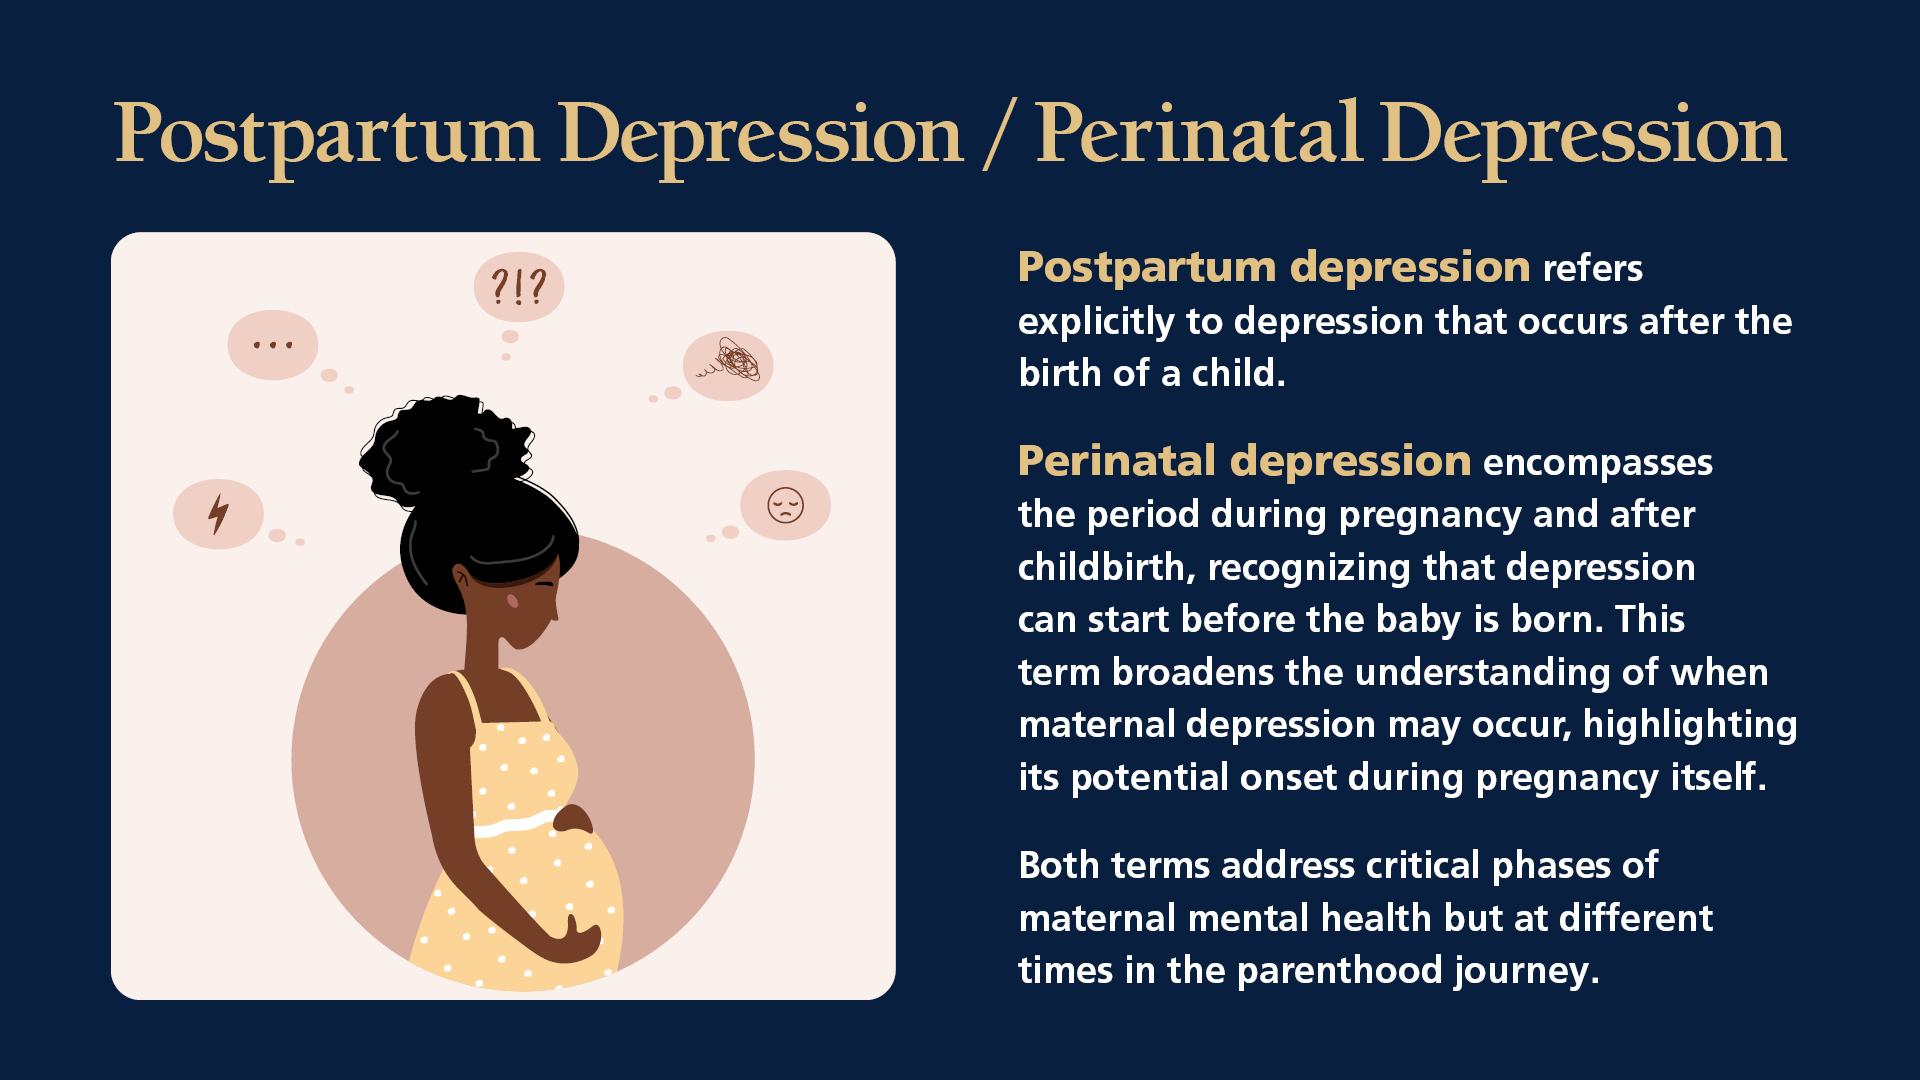 Postpartum Depression / Perinatal Depression: Perinatal depression encompasses the period during pregnancy and after childbirth, recognizing that depression can start before the baby is born. This term broadens the understanding of when maternal depression may occur, highlighting its potential onset during pregnancy itself. Postpartum depression refers explicitly to depression that occurs after the birth of a child. Both terms address critical phases of maternal mental health but at different times in the motherhood journey.